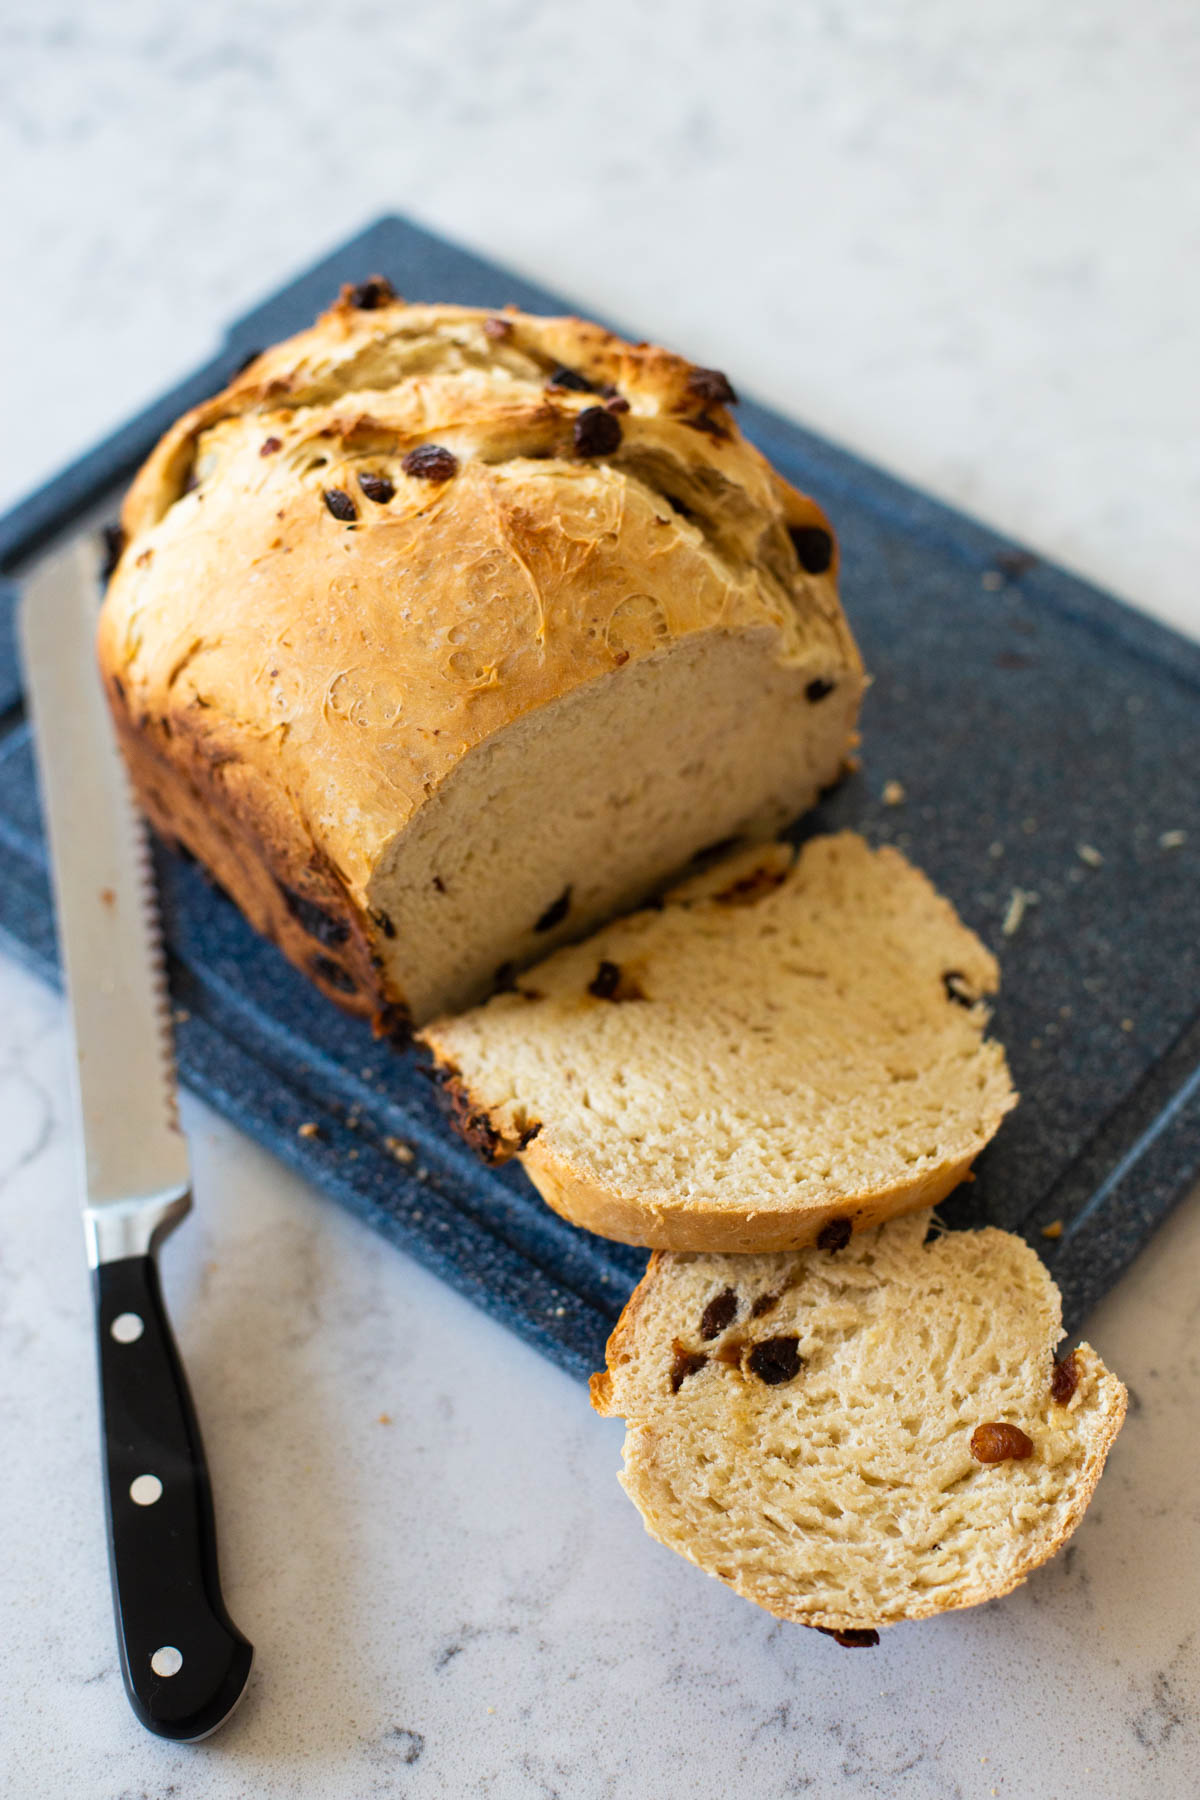 The raisin bread is on a cutting board and has been sliced with a long serrated bread knife.